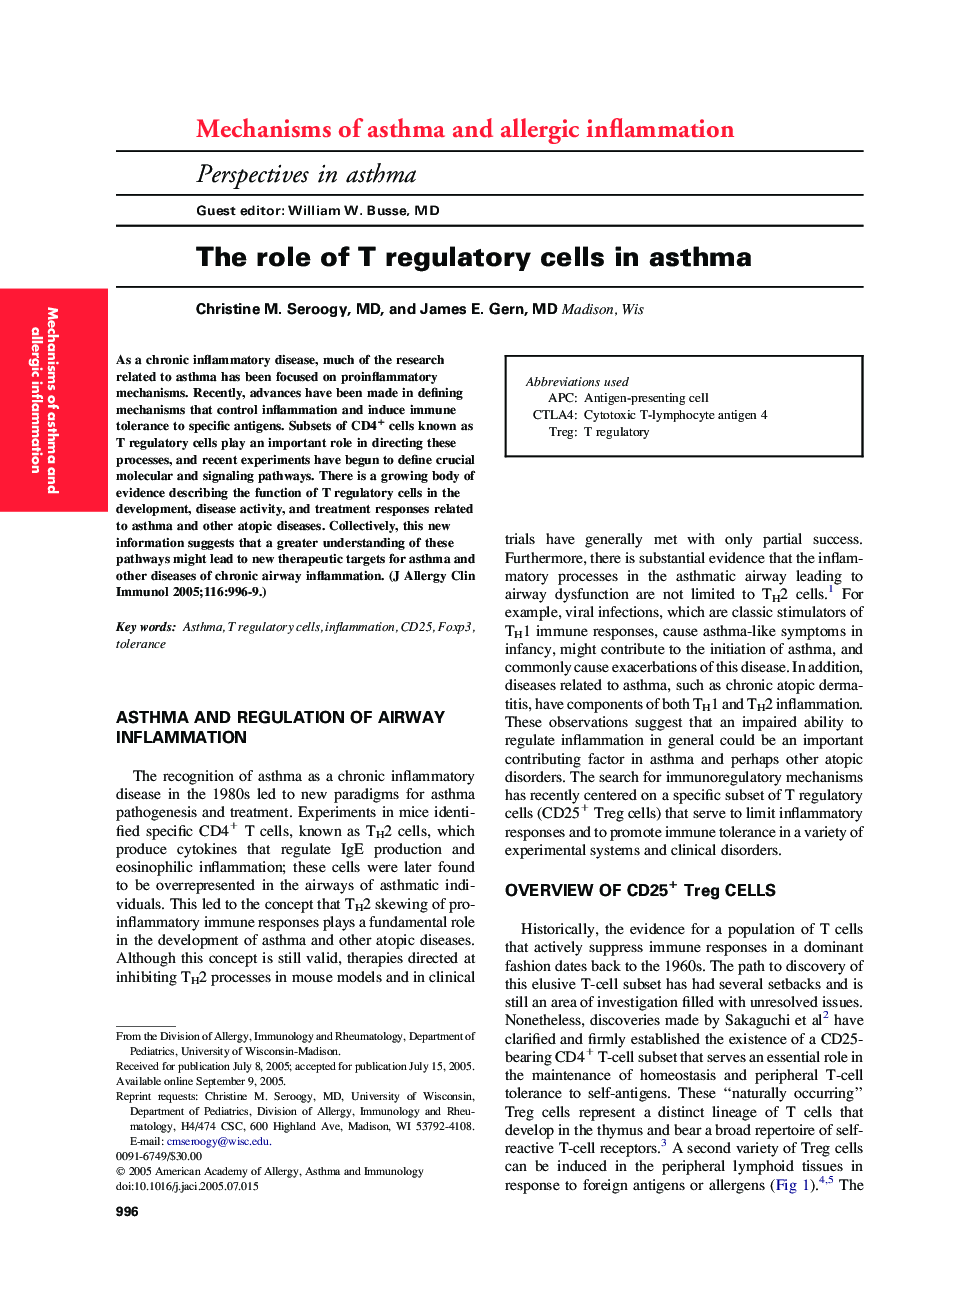 The role of T regulatory cells in asthma